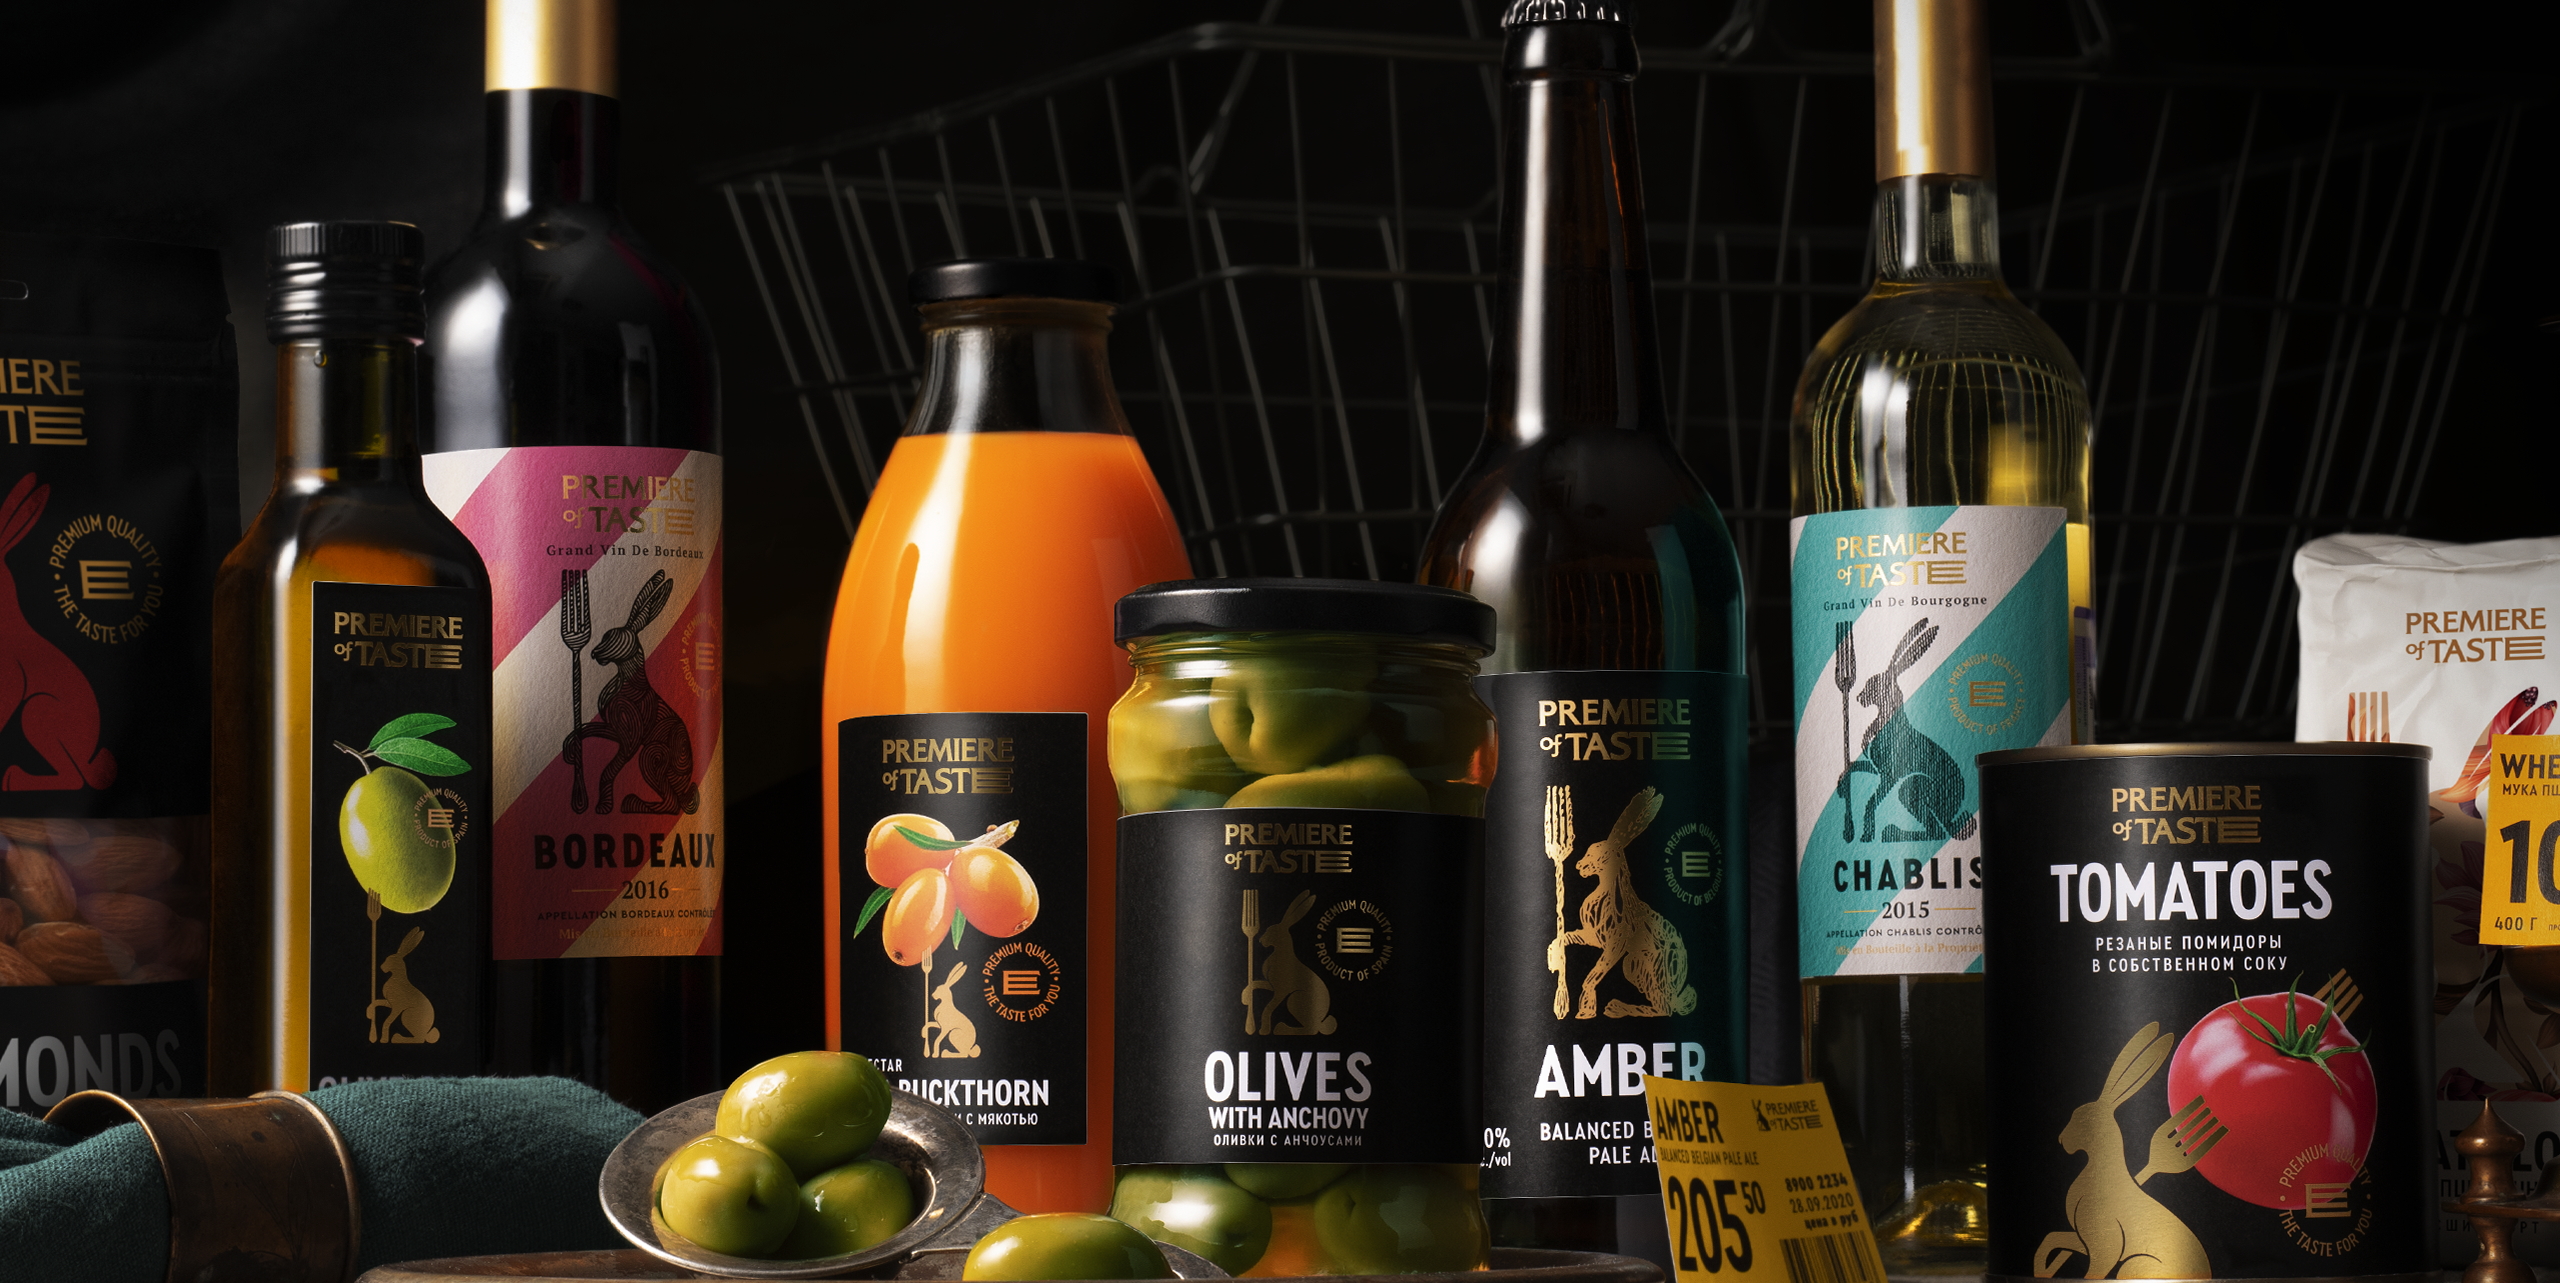 The Premier of Taste brand design system by Depot reflects the concept of fast-luxury and affordable premium products with dynamically updated range of products